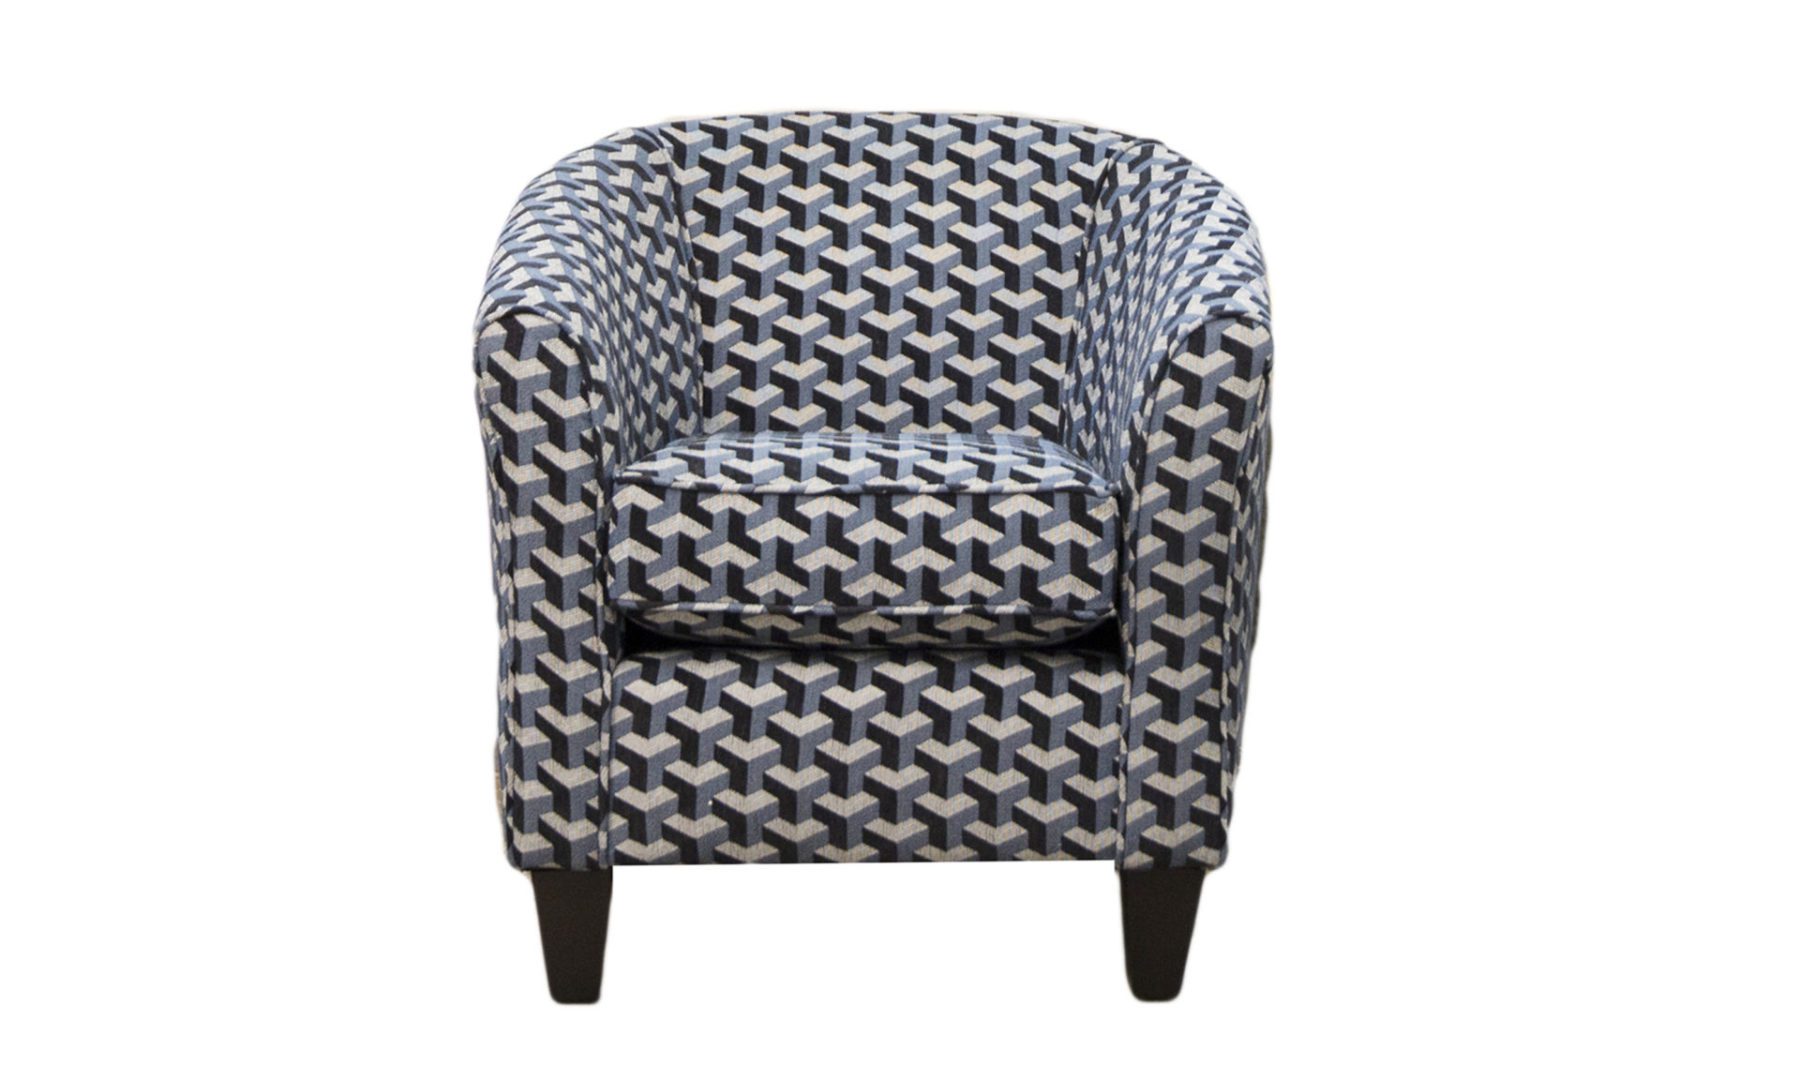 Tub Chair in Levonne Navy, Silver Collection of Fabrics